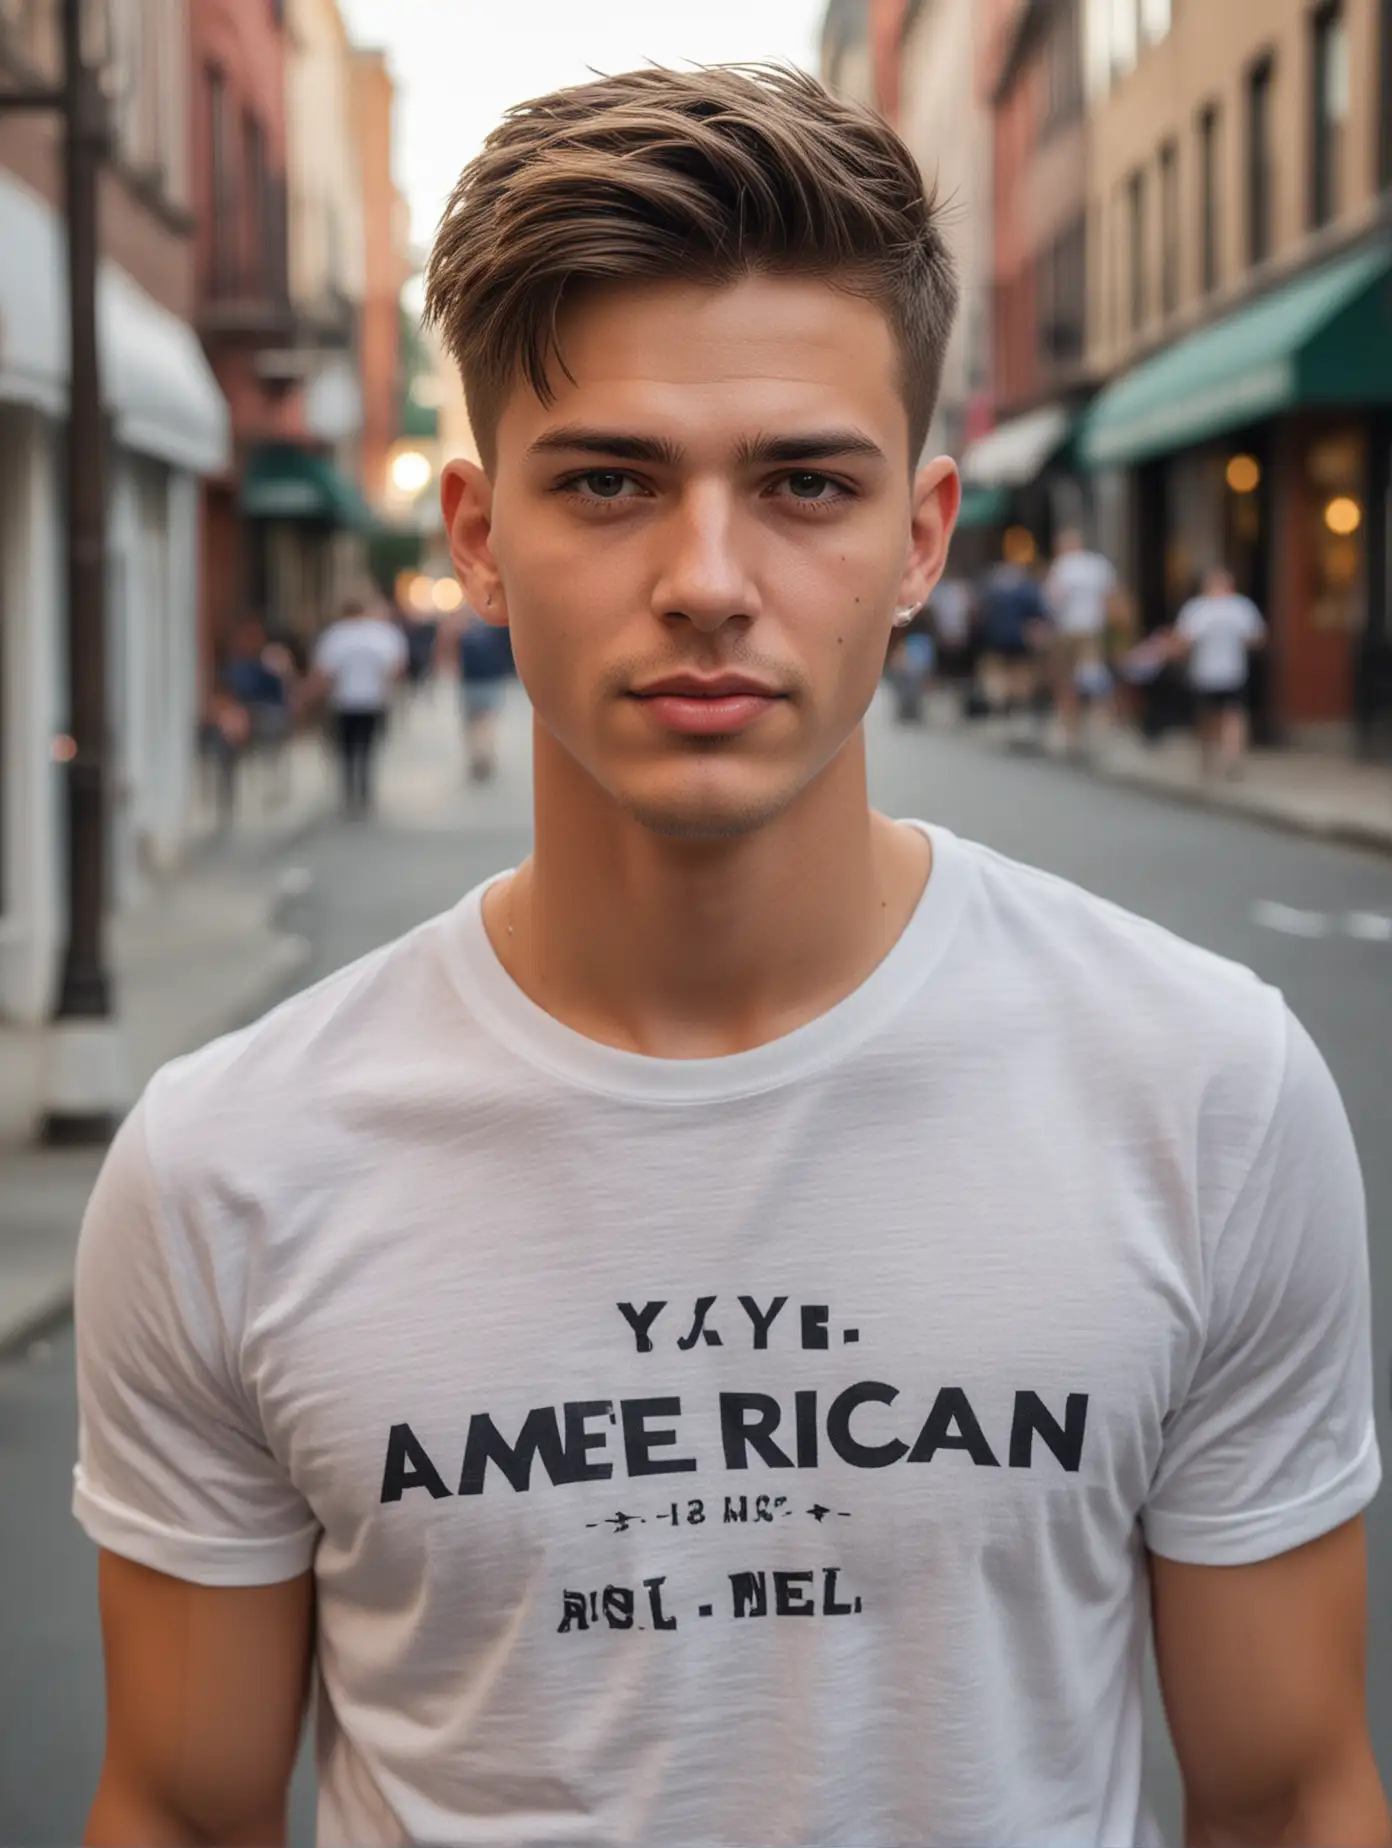 A handsome guy with an American-style short haircut, wearing a fashionable T-shirt, street photography, facing the camera, exquisite facial features, professional photography skills